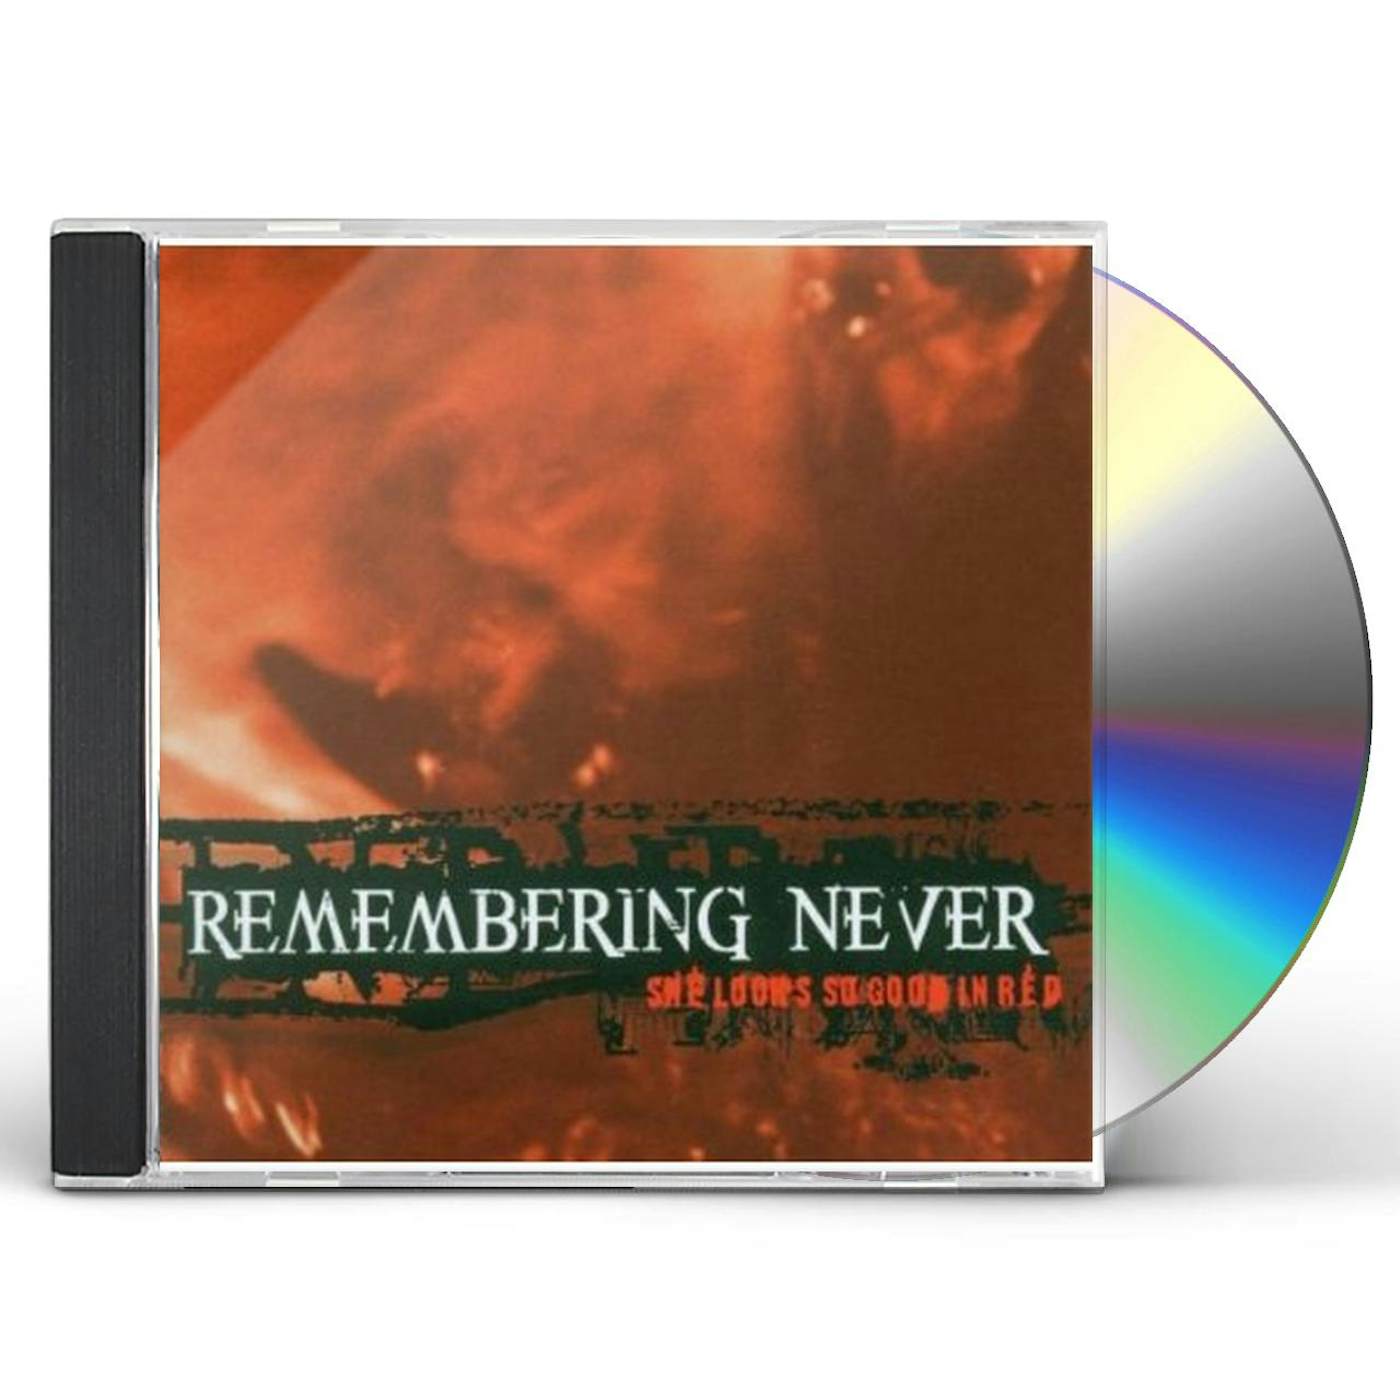 Remembering Never SHE LOOKS SO GOOD IN RED CD